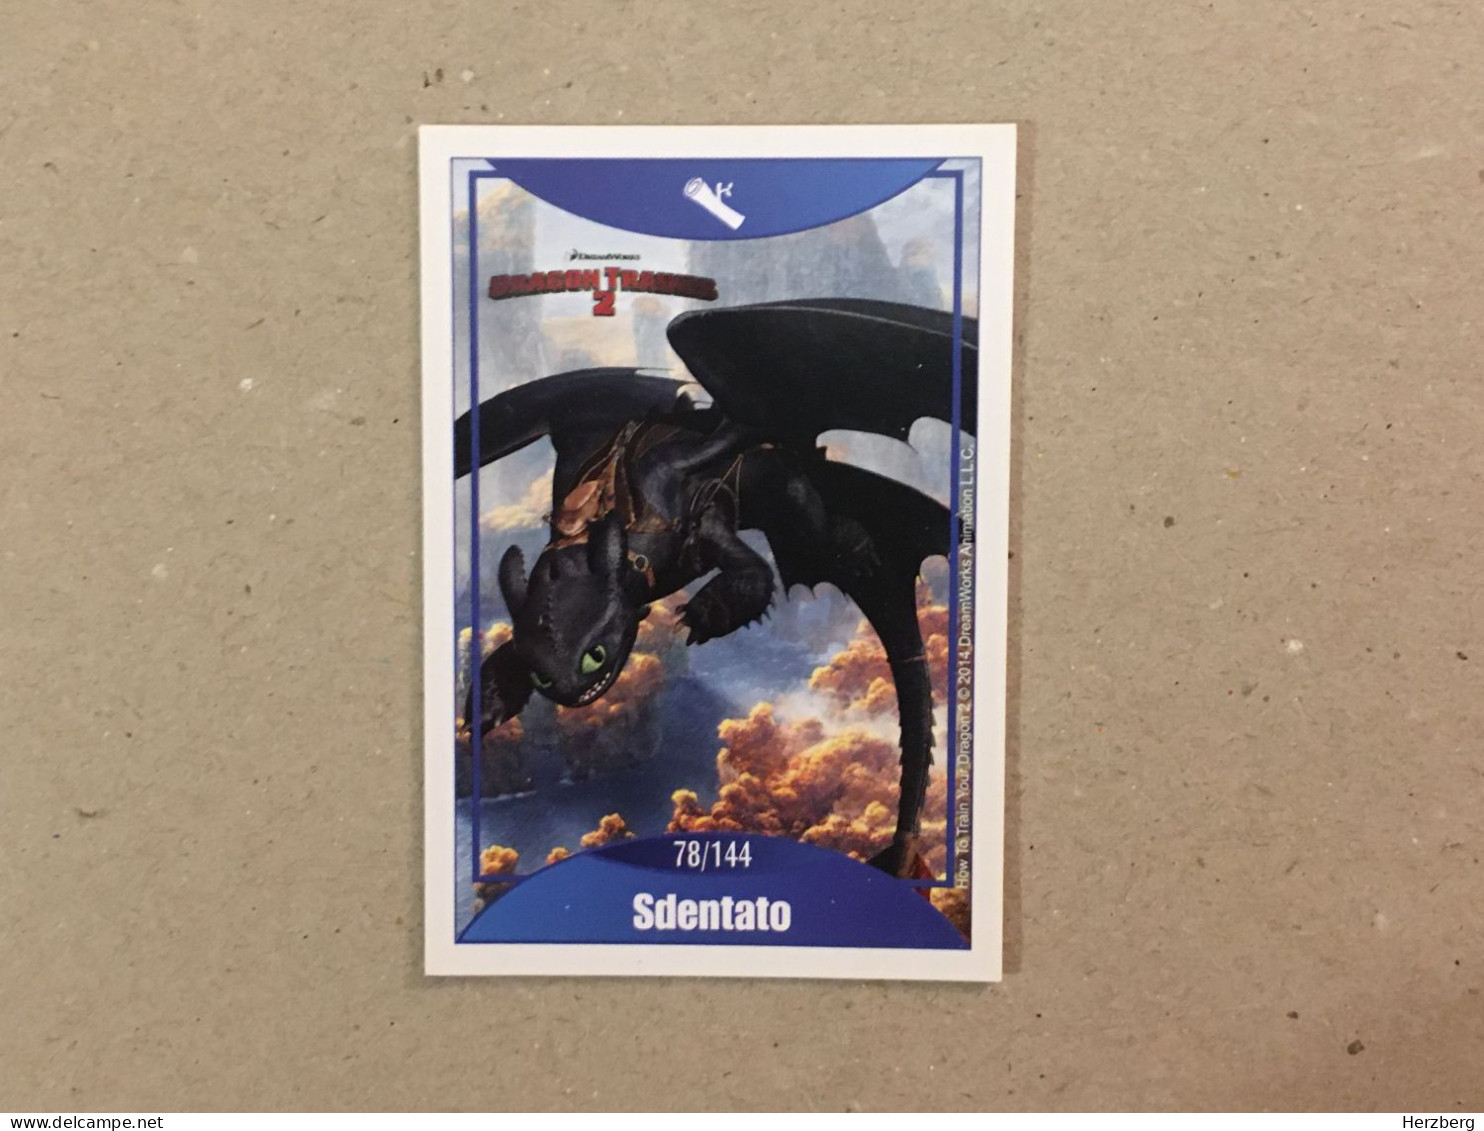 Italy Edition - How To Train Your Dragon 2 - Le Grandi Avventure - Dreamworks Pictures 2014 - Collection Trading Card - Other & Unclassified